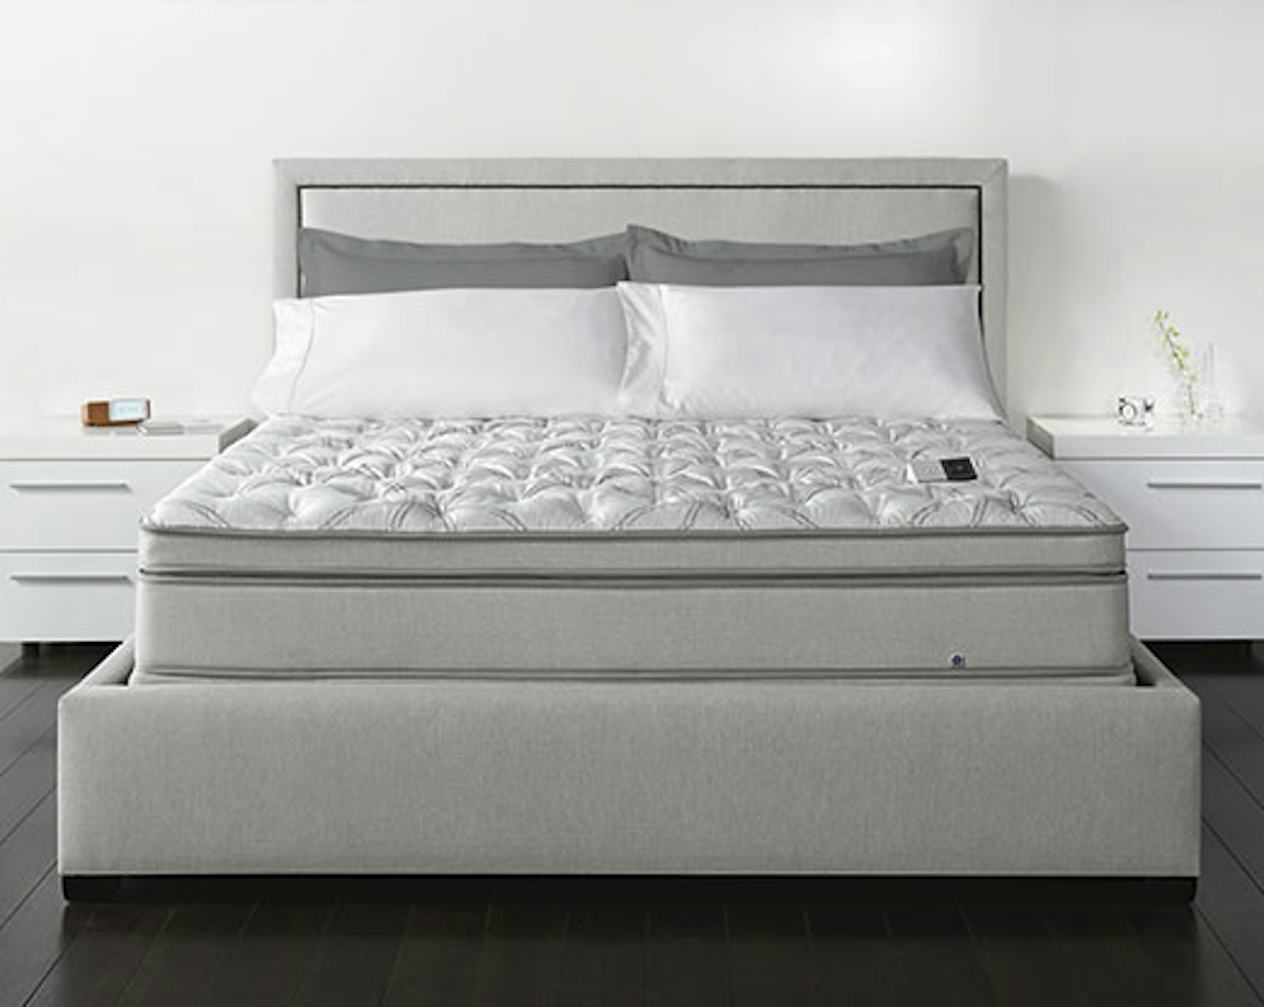 ratings for mattresses made by bedding industries